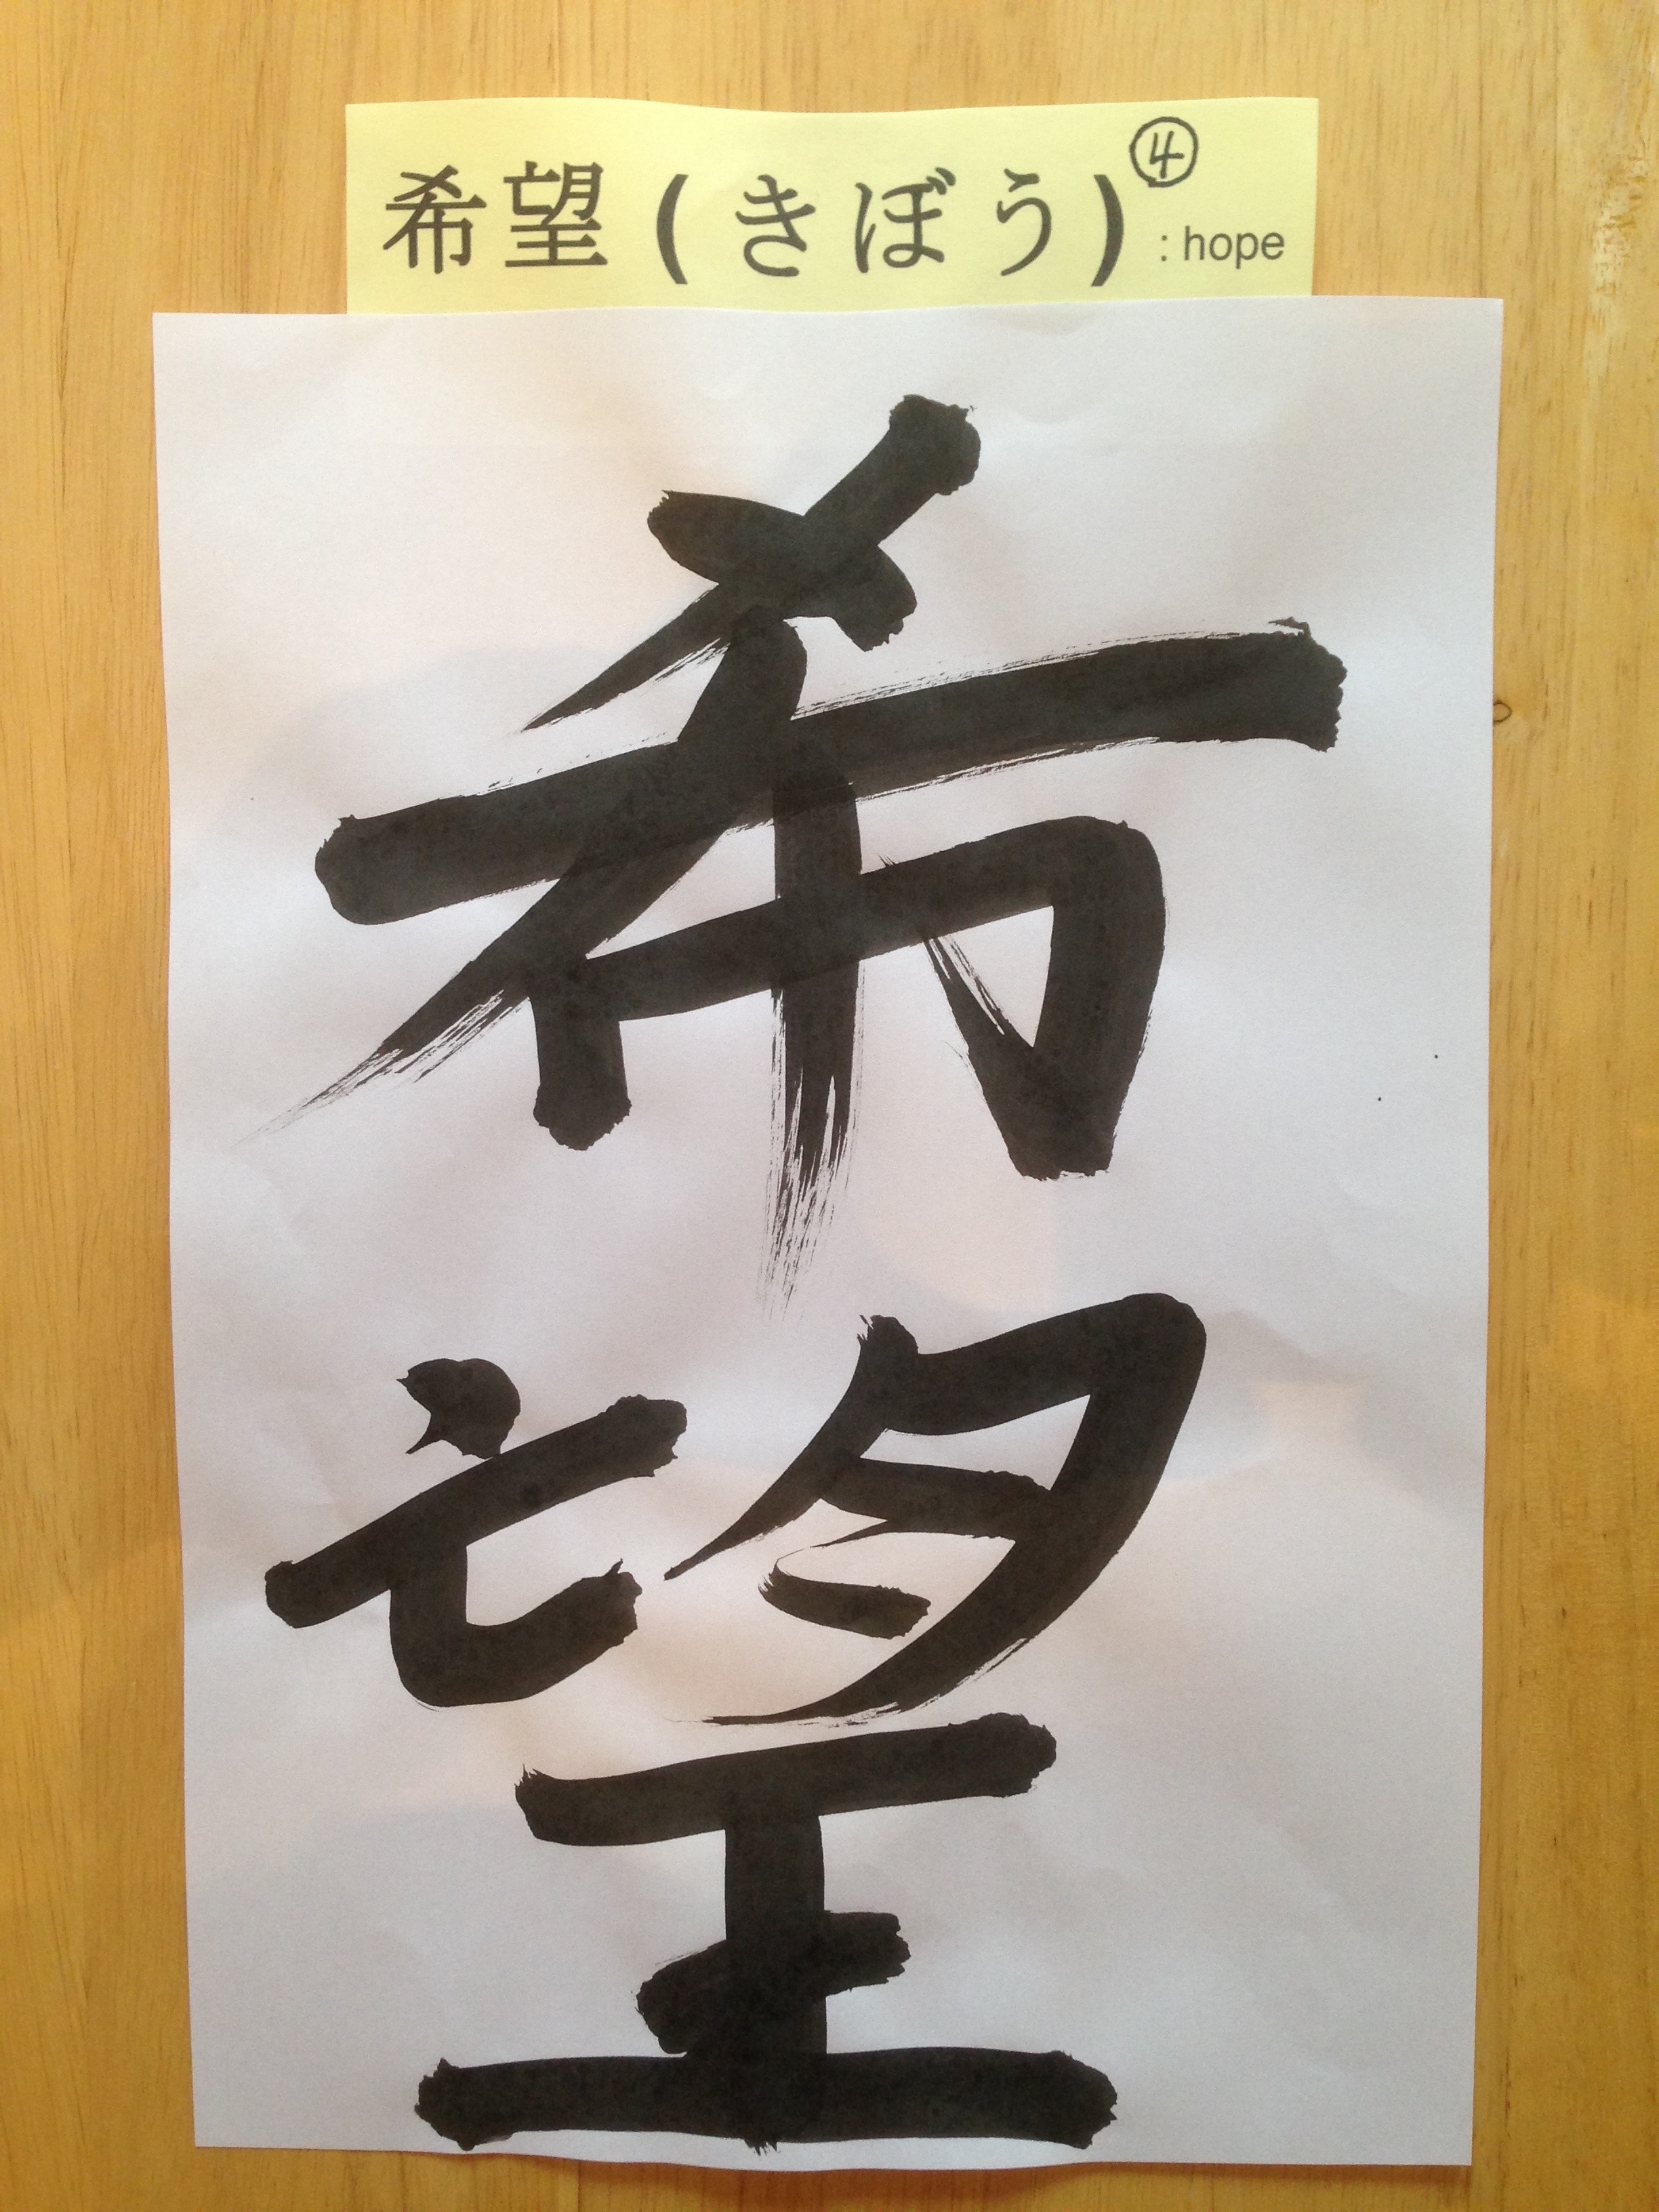 Learn how to write in japanese calligraphy